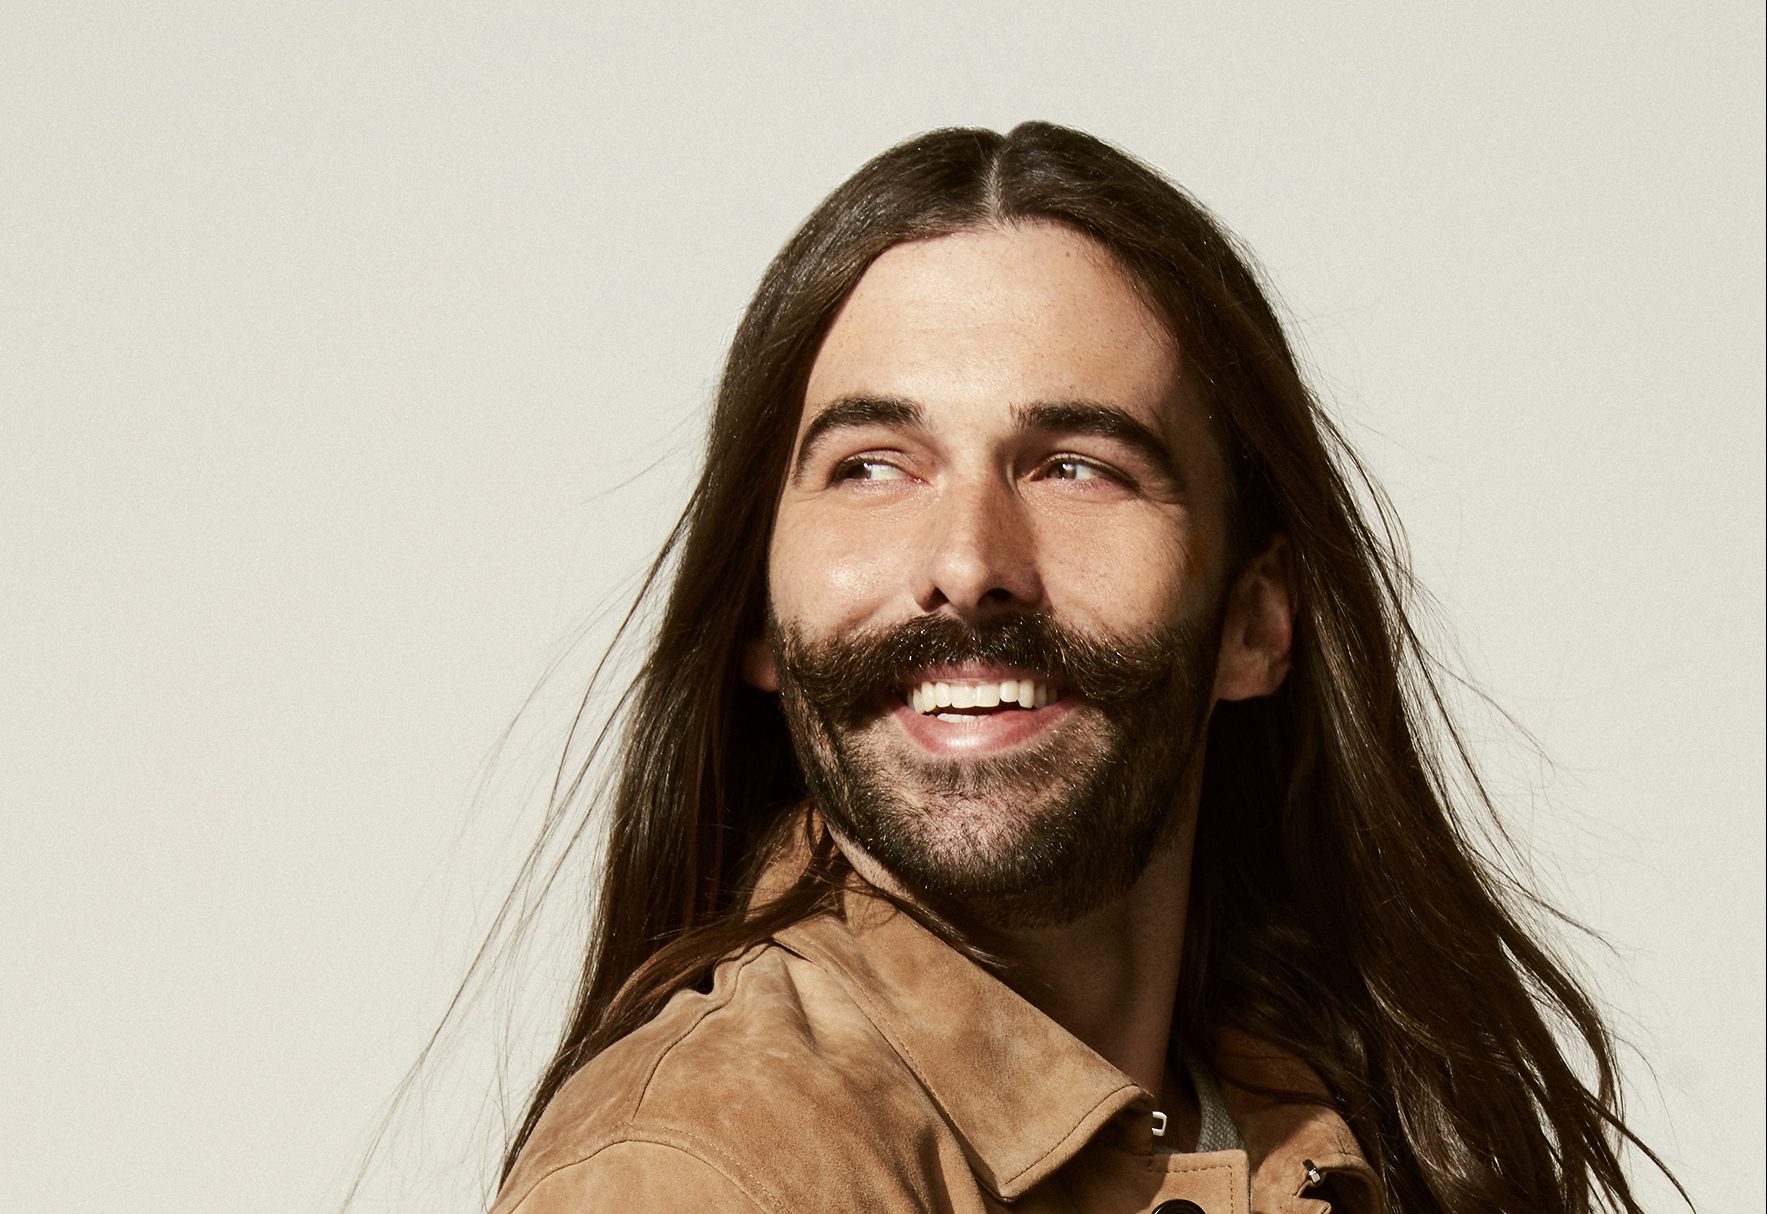 Van Ness, 31, is the effervescent grooming expert of Queer Eye. He returns to Netflix for the show’s second season on June 15. (Austin Hargrave—Netflix)